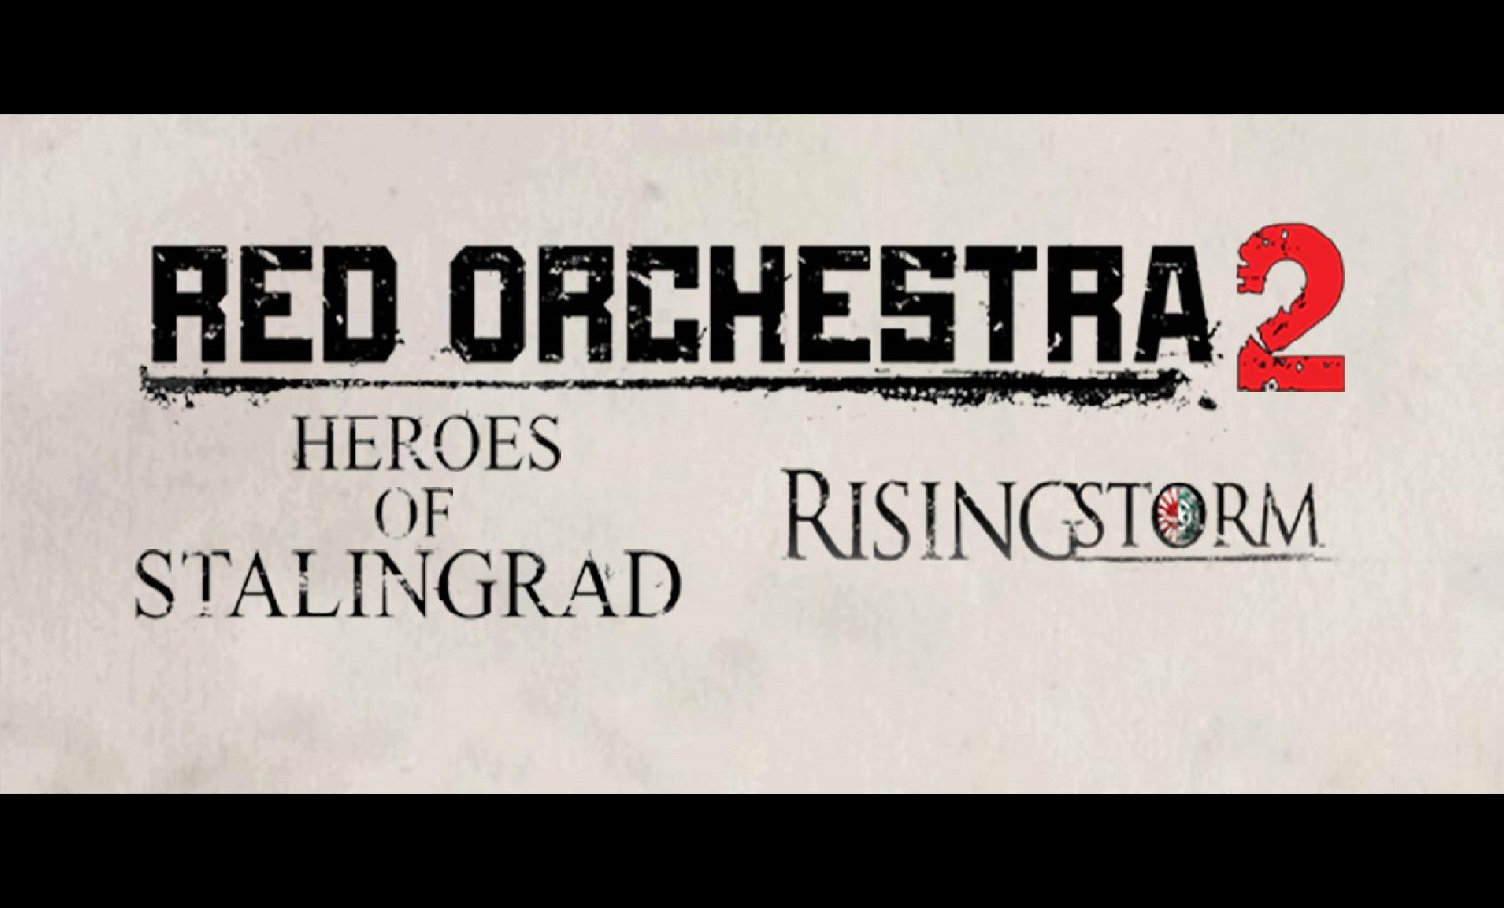 Rising Storm/Red Orchestra 2 Review